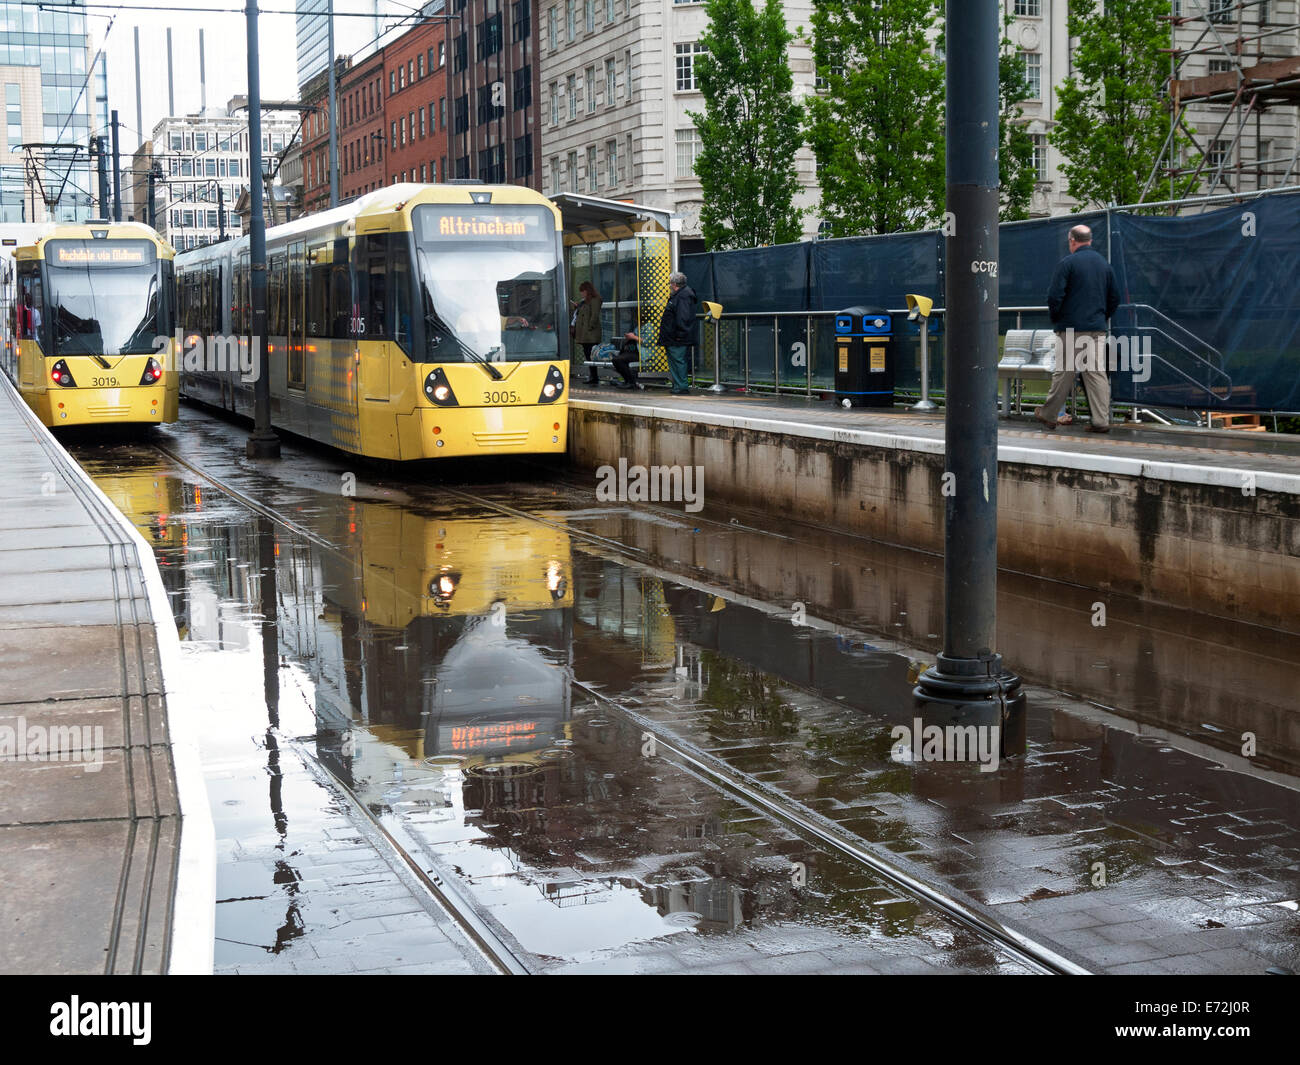 Manchester Metrolink tram on a wet day in St. Peter's Square, Manchester, England, UK Stock Photo